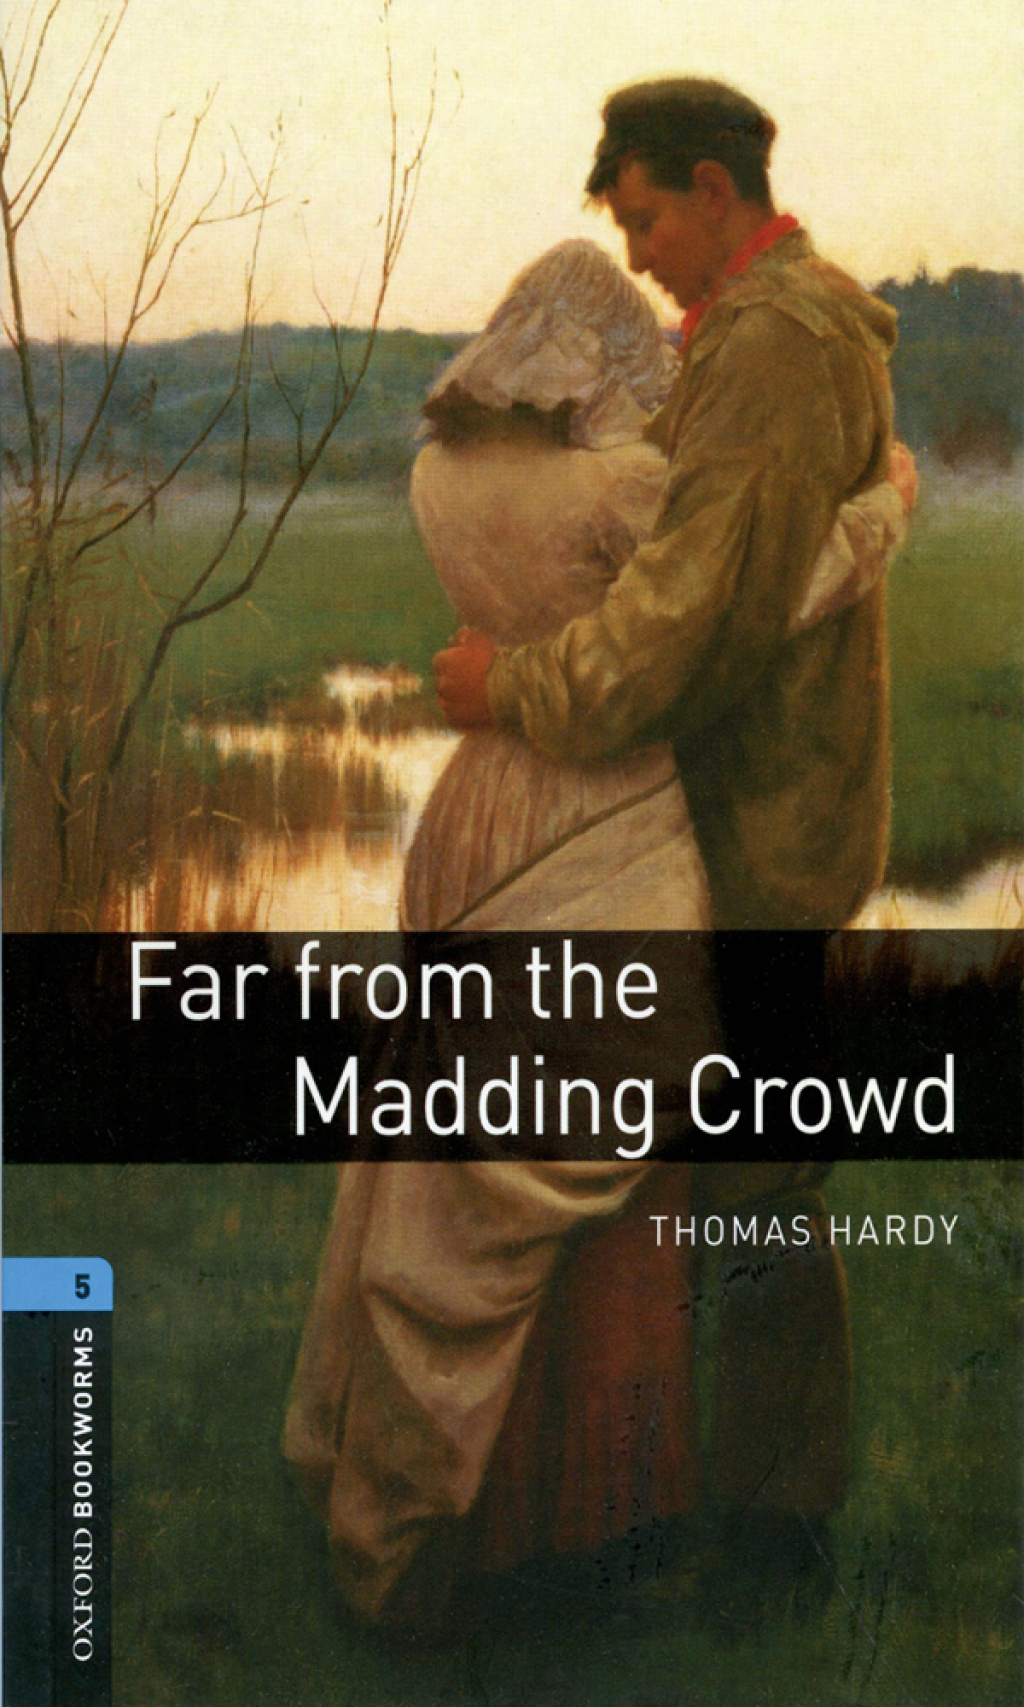 Far from the Madding Crowd Level 5 Oxford Bookworms Library - 3rd Edition (eBook Rental)